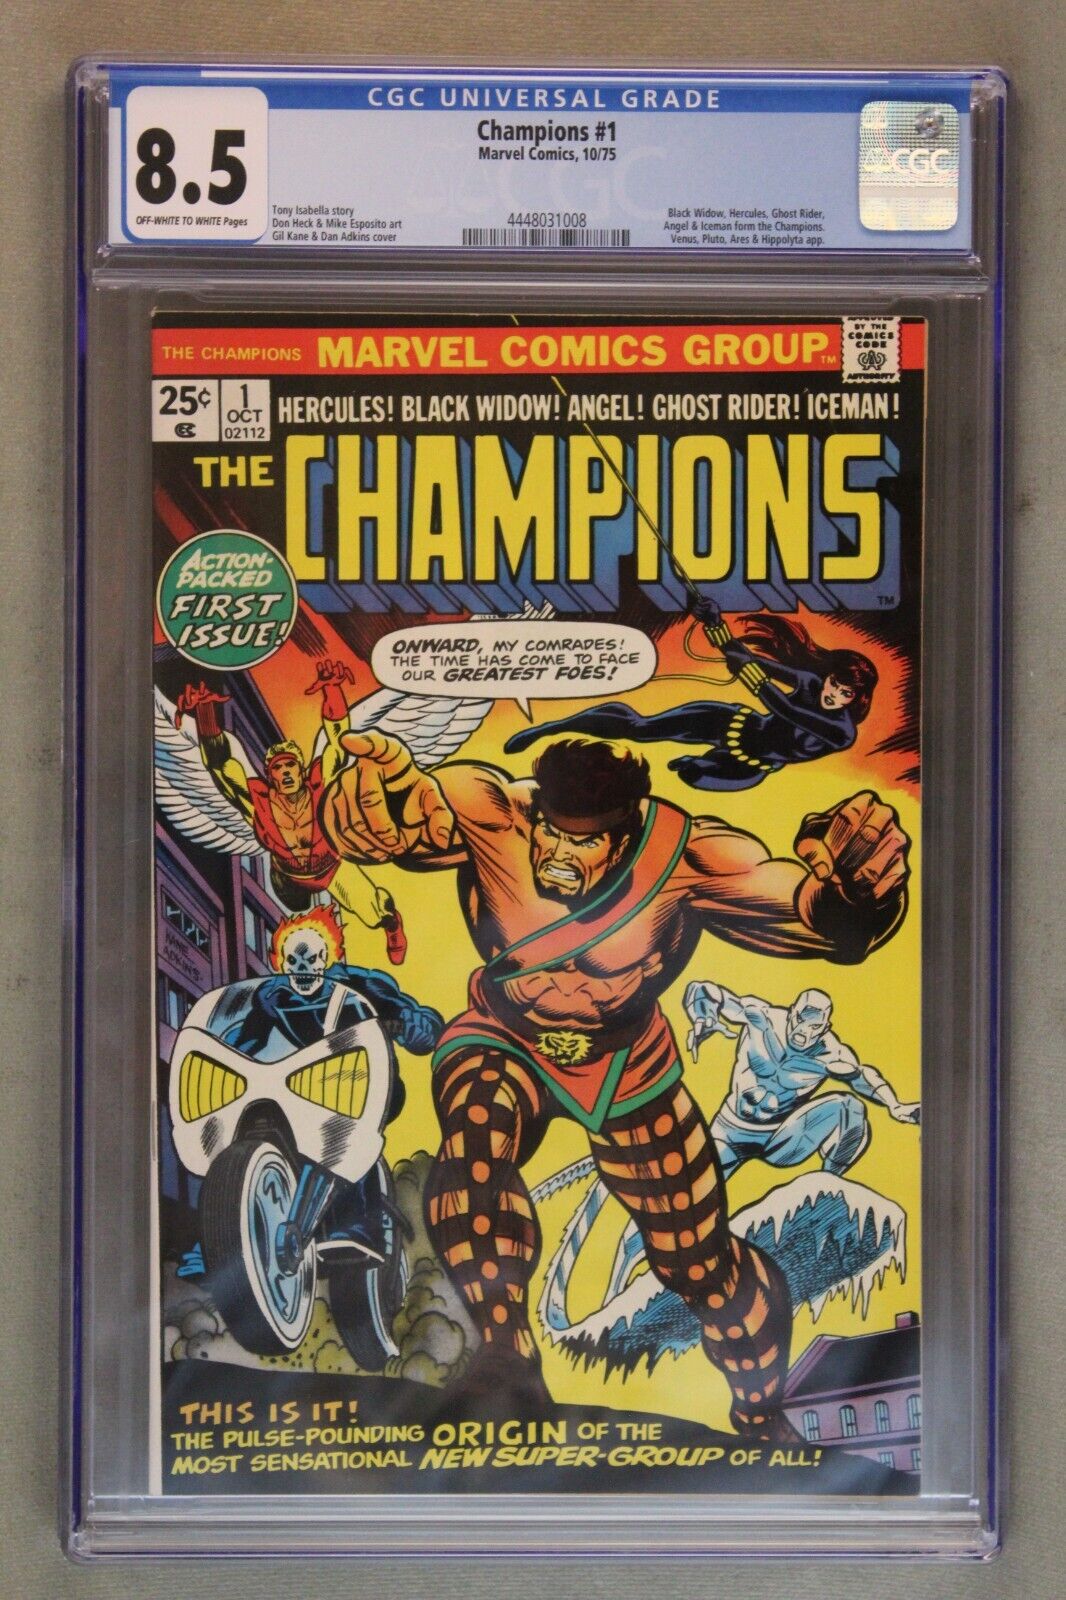 The Champions #1 ~ 10/1975 ~ CGC Graded at 8.5 with Off-White to White Pages